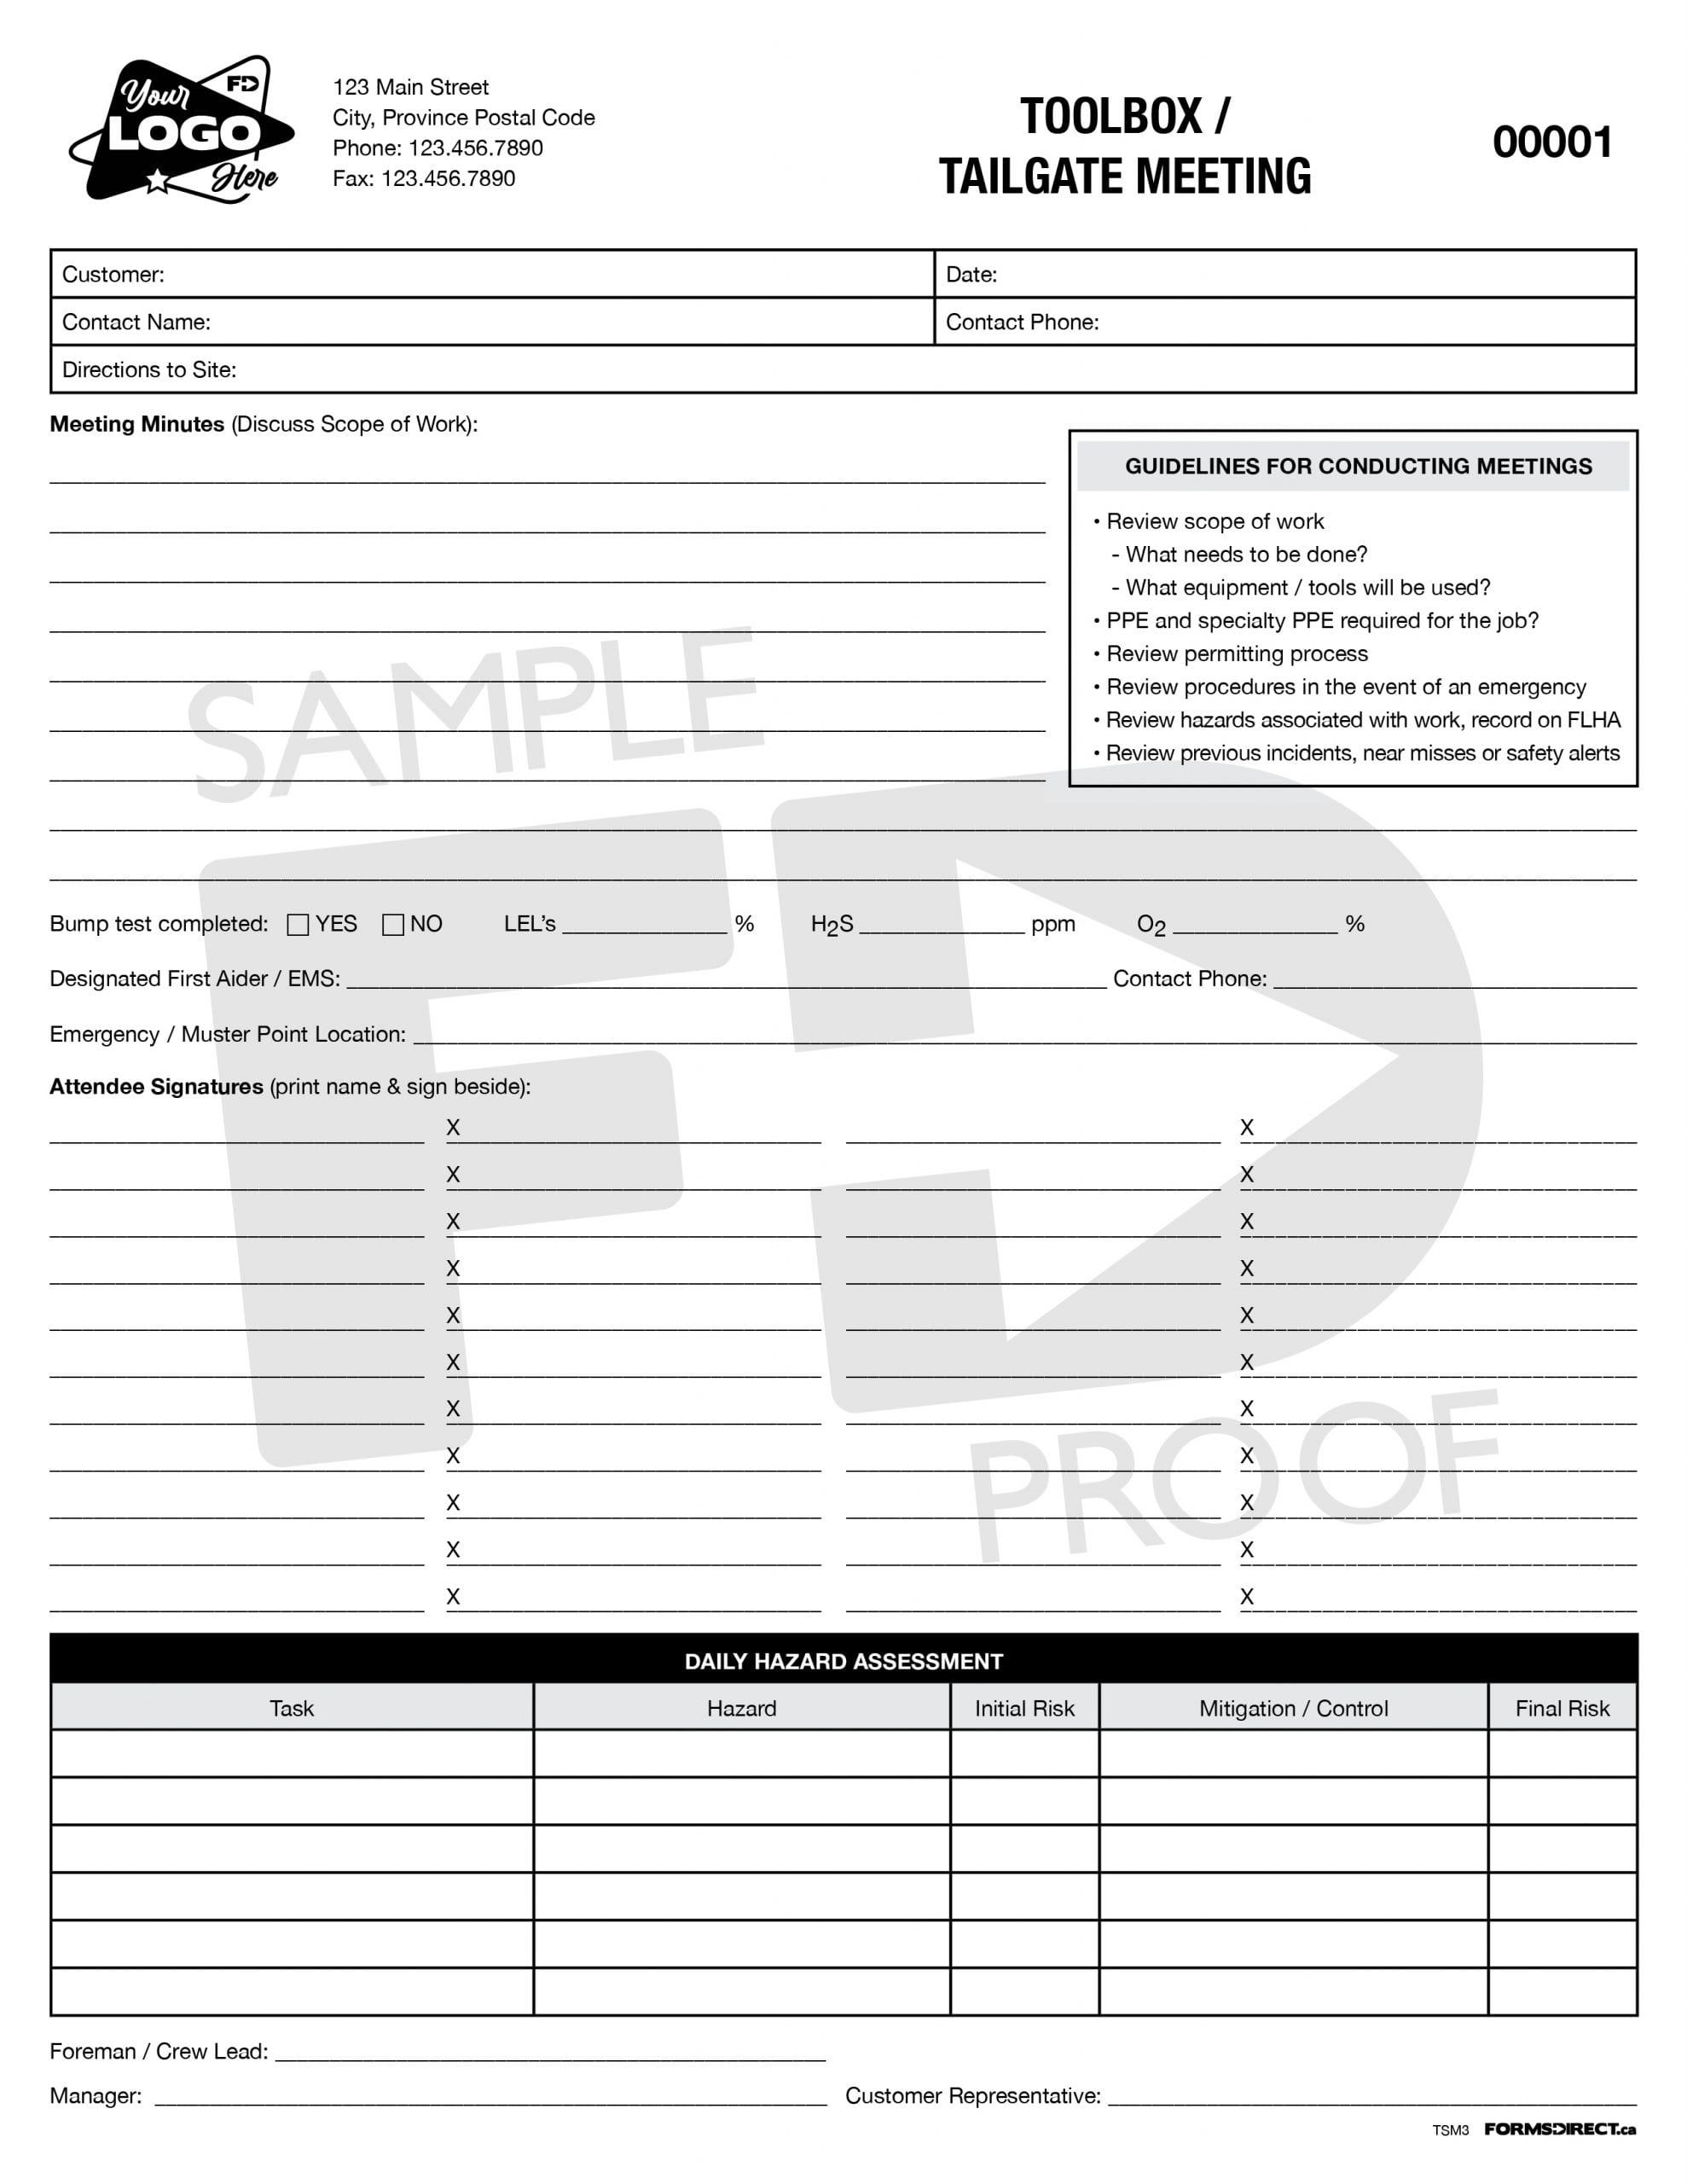 toolbox-tailgate-meeting-tsm3-custom-form-template-forms-direct